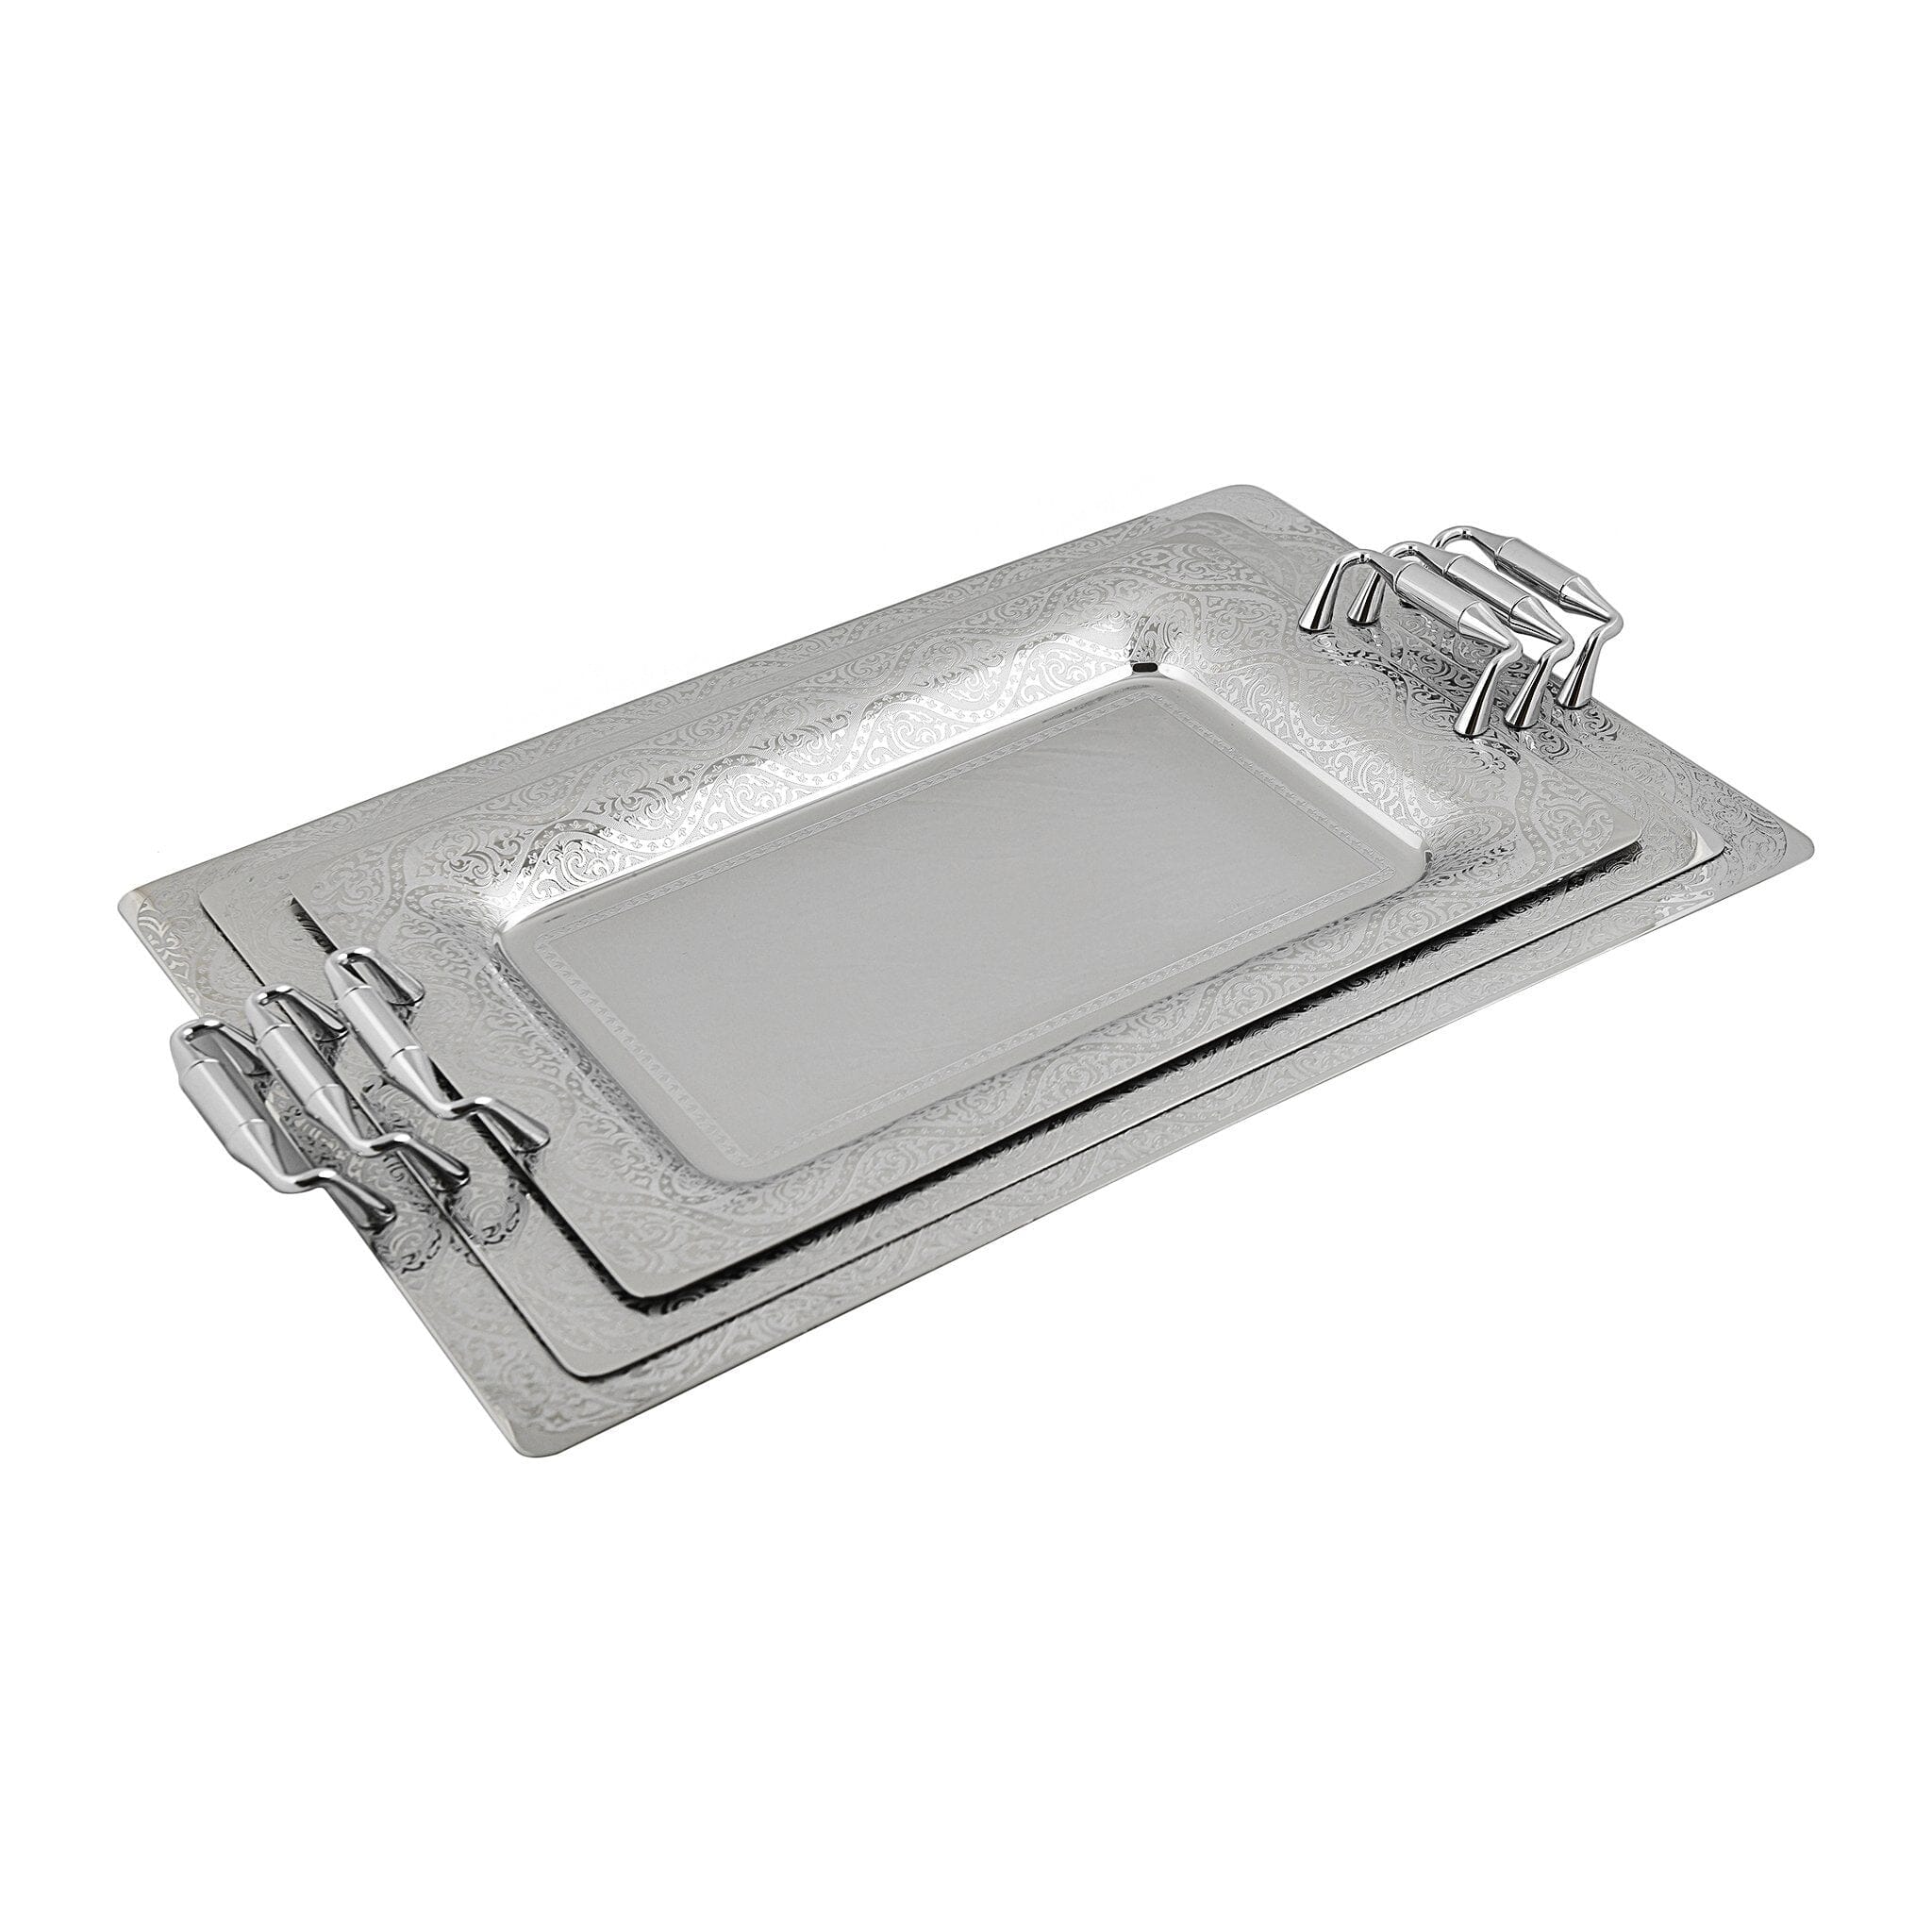 Elegant Gioiel - Rectangular Tray Set with Handles 3 Pieces - Stainless Steel 18/10 - 75000213